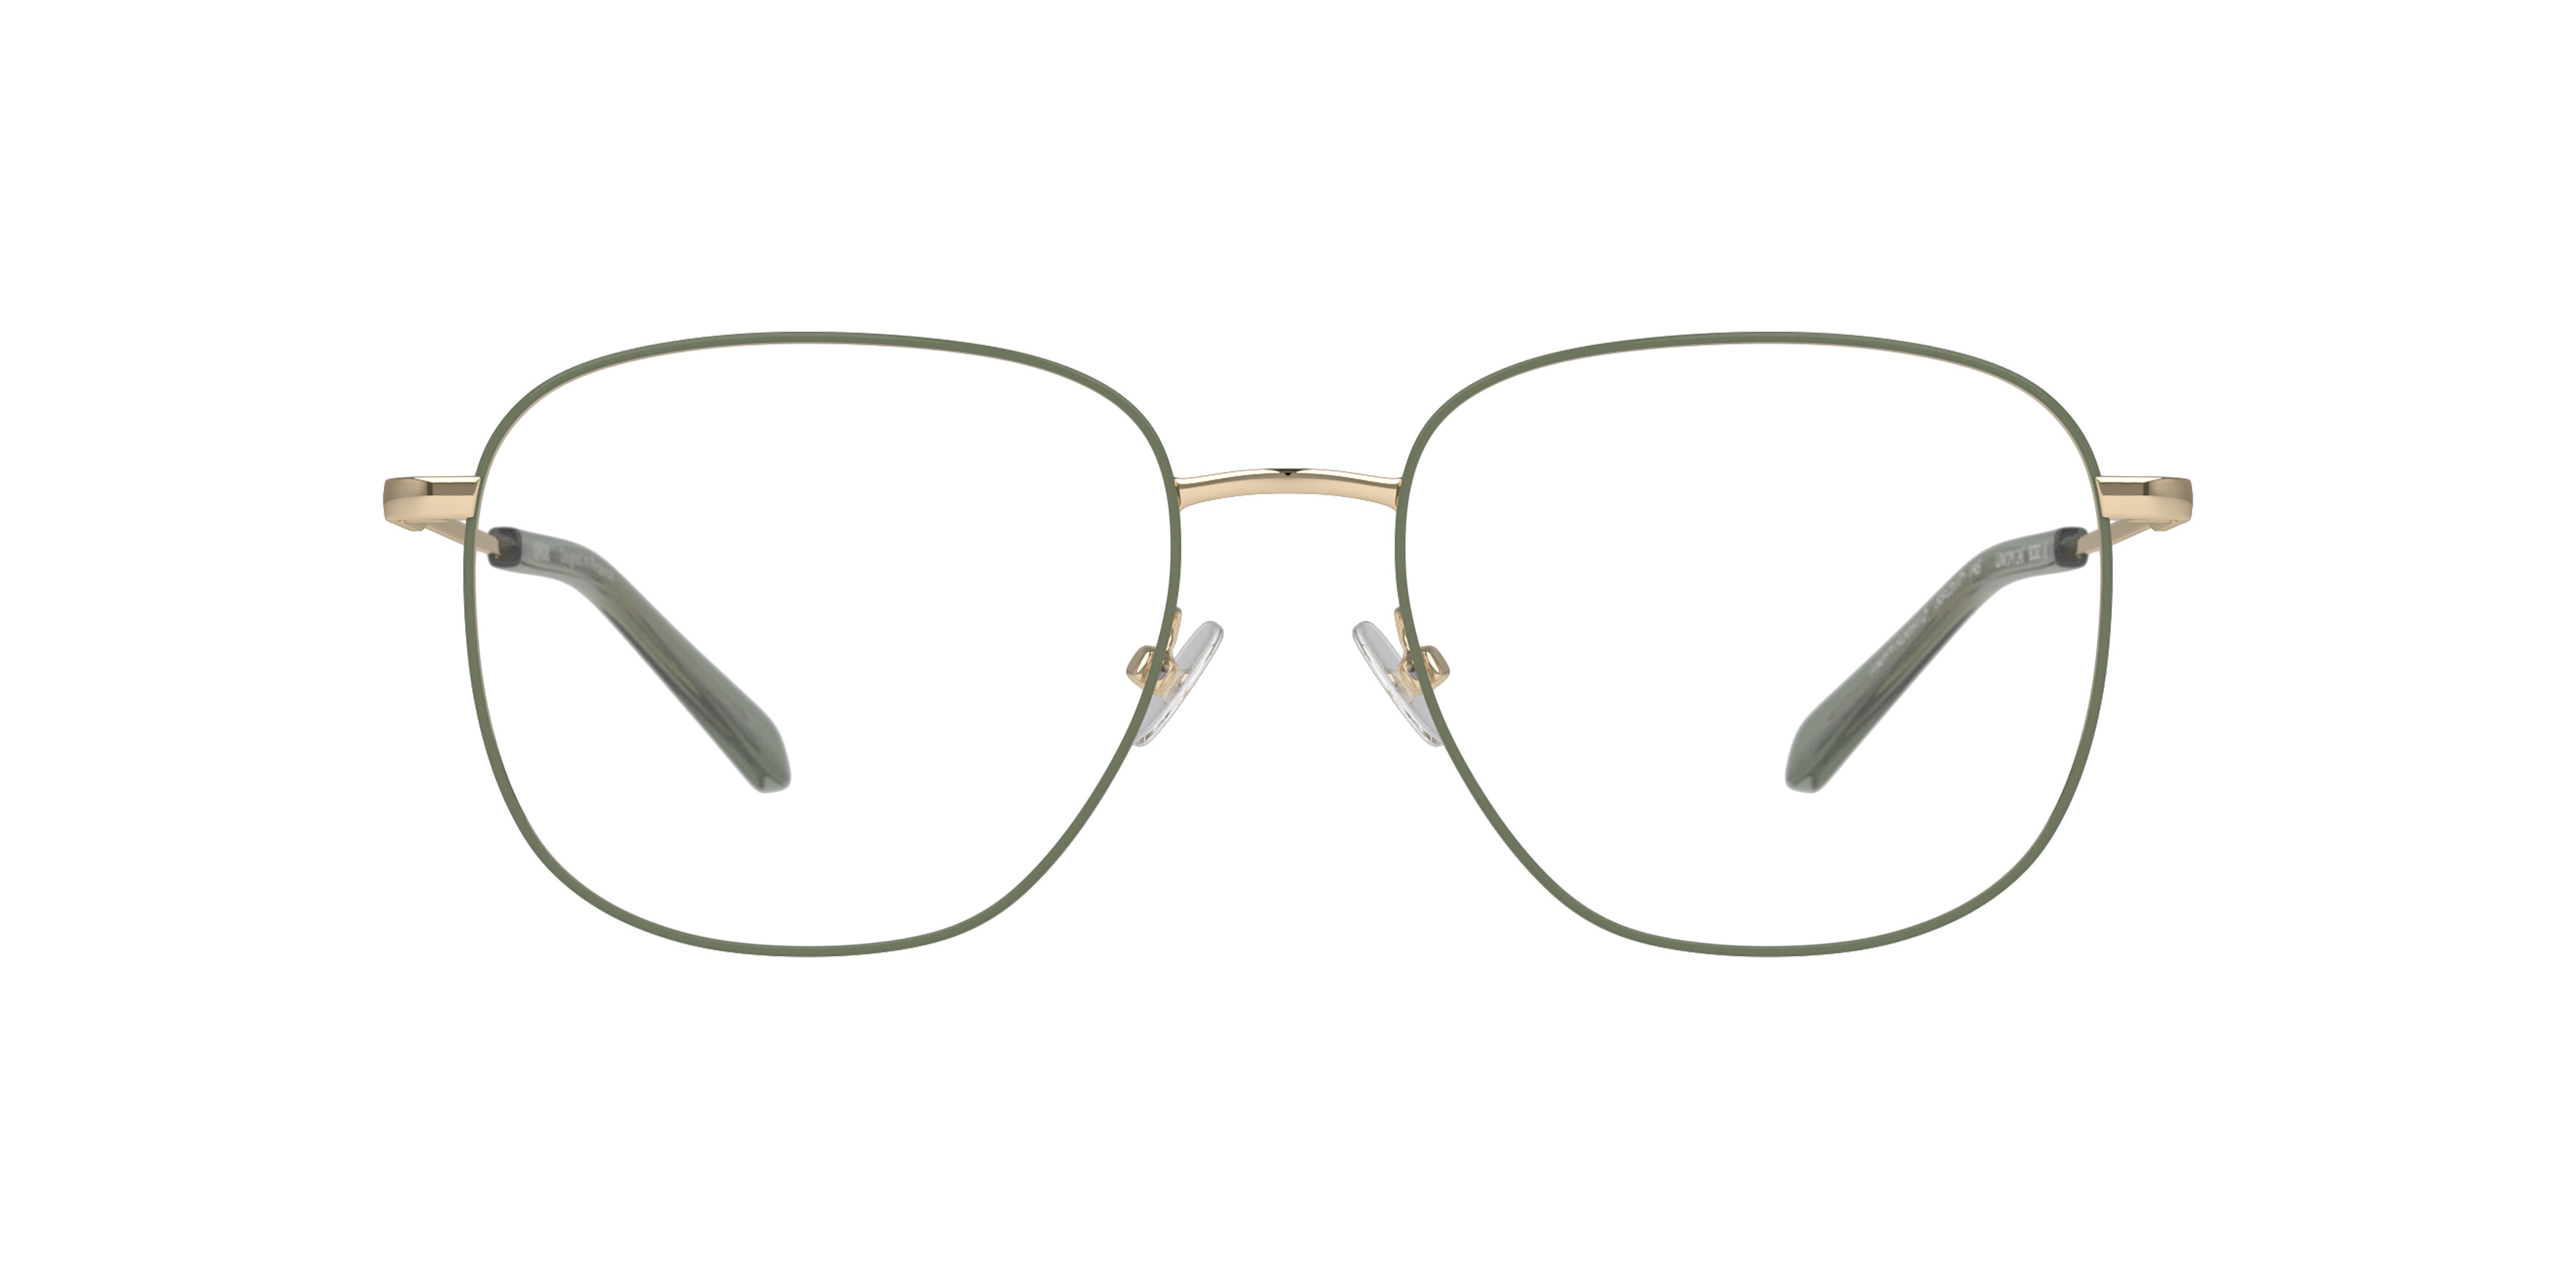 [products.image.front] UNOFFICIAL UNOM0259 ED00 Brille